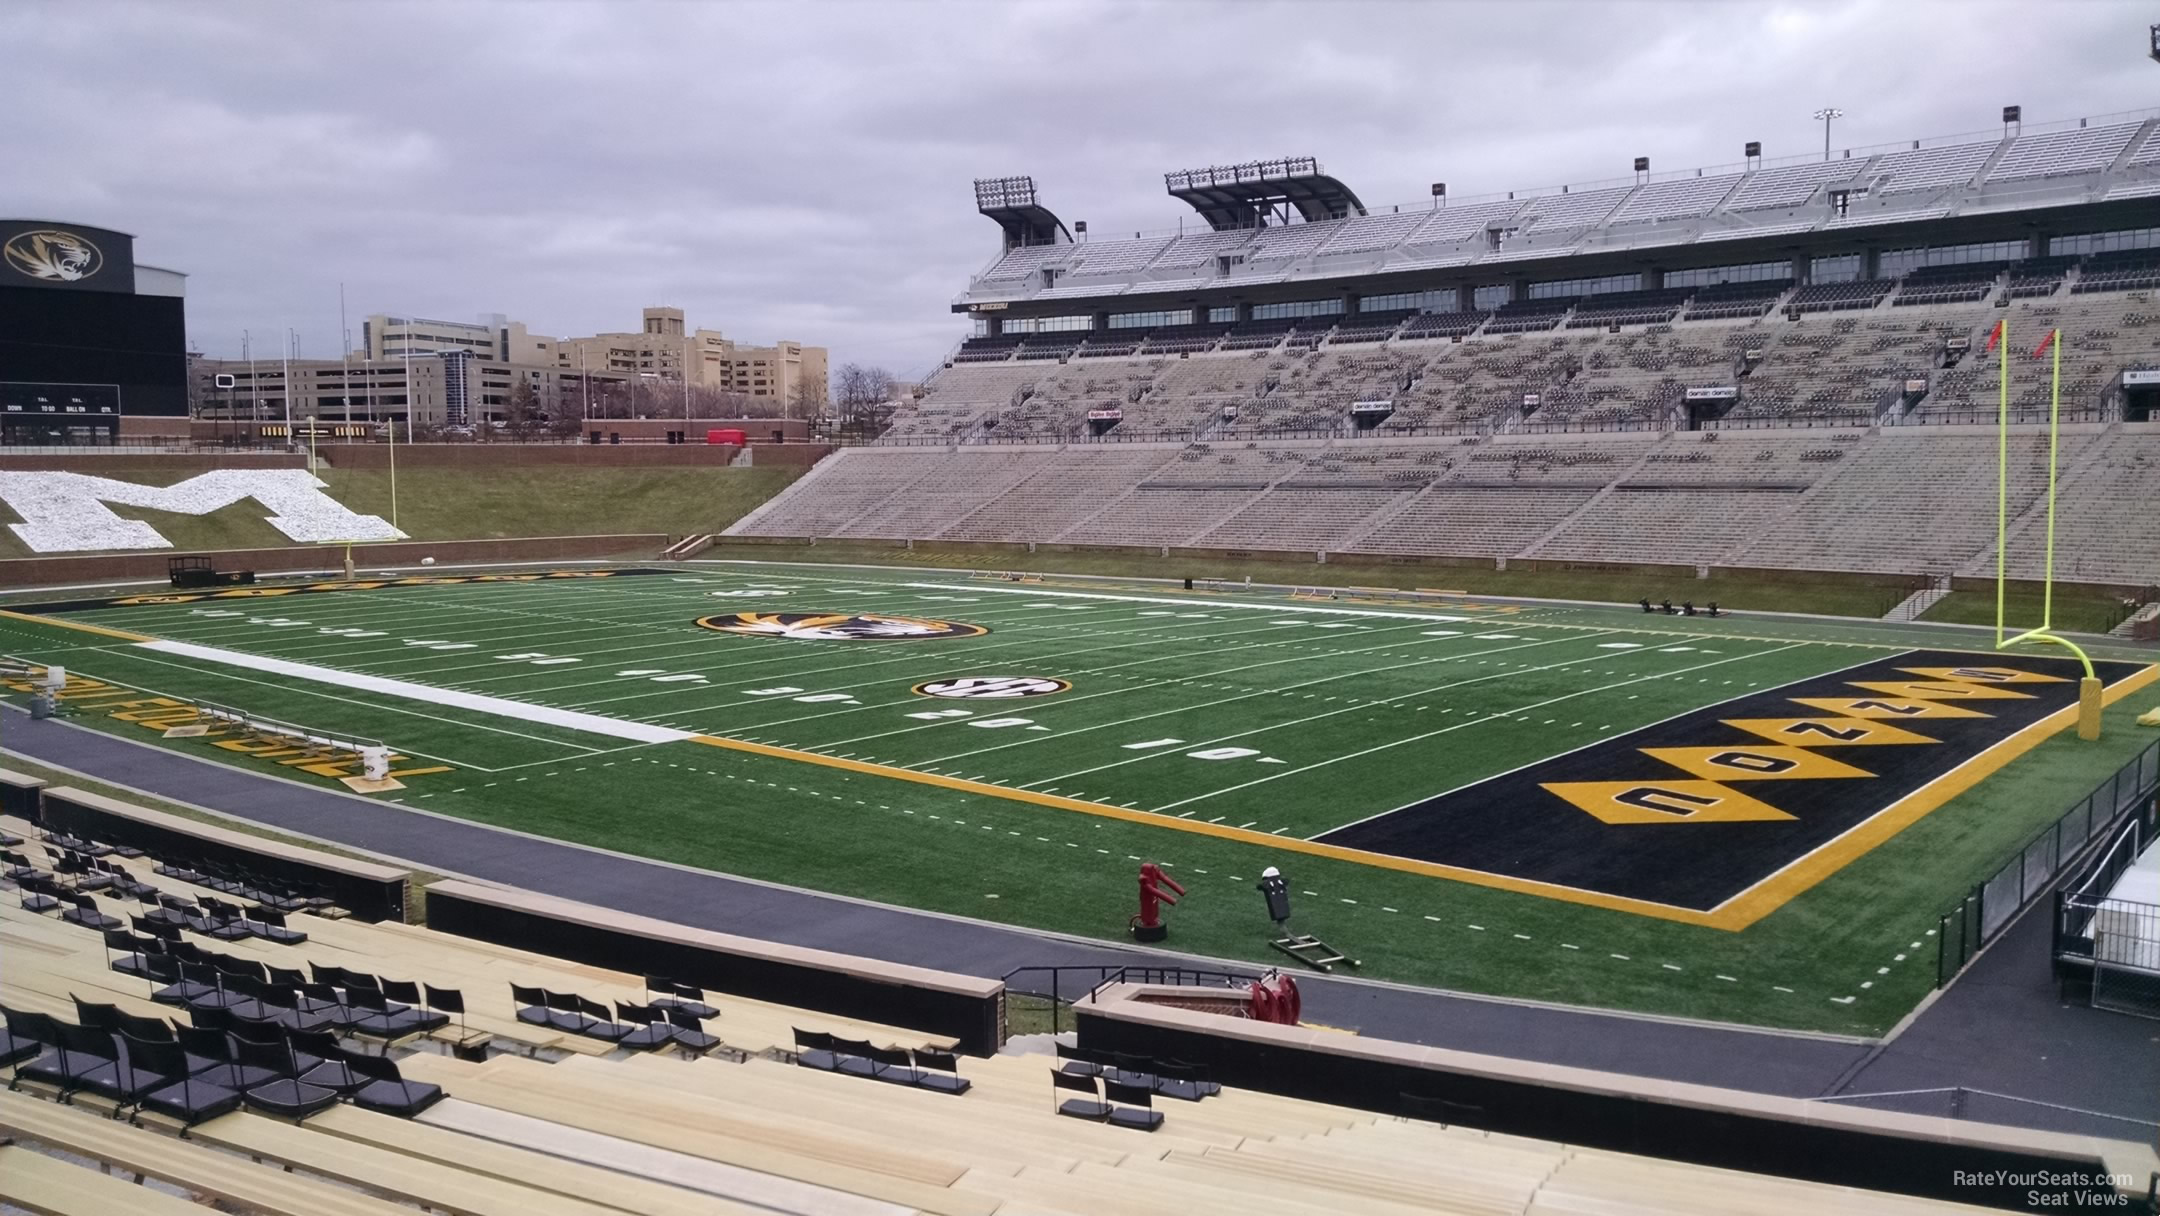 Section 125 at Faurot Field - RateYourSeats.com